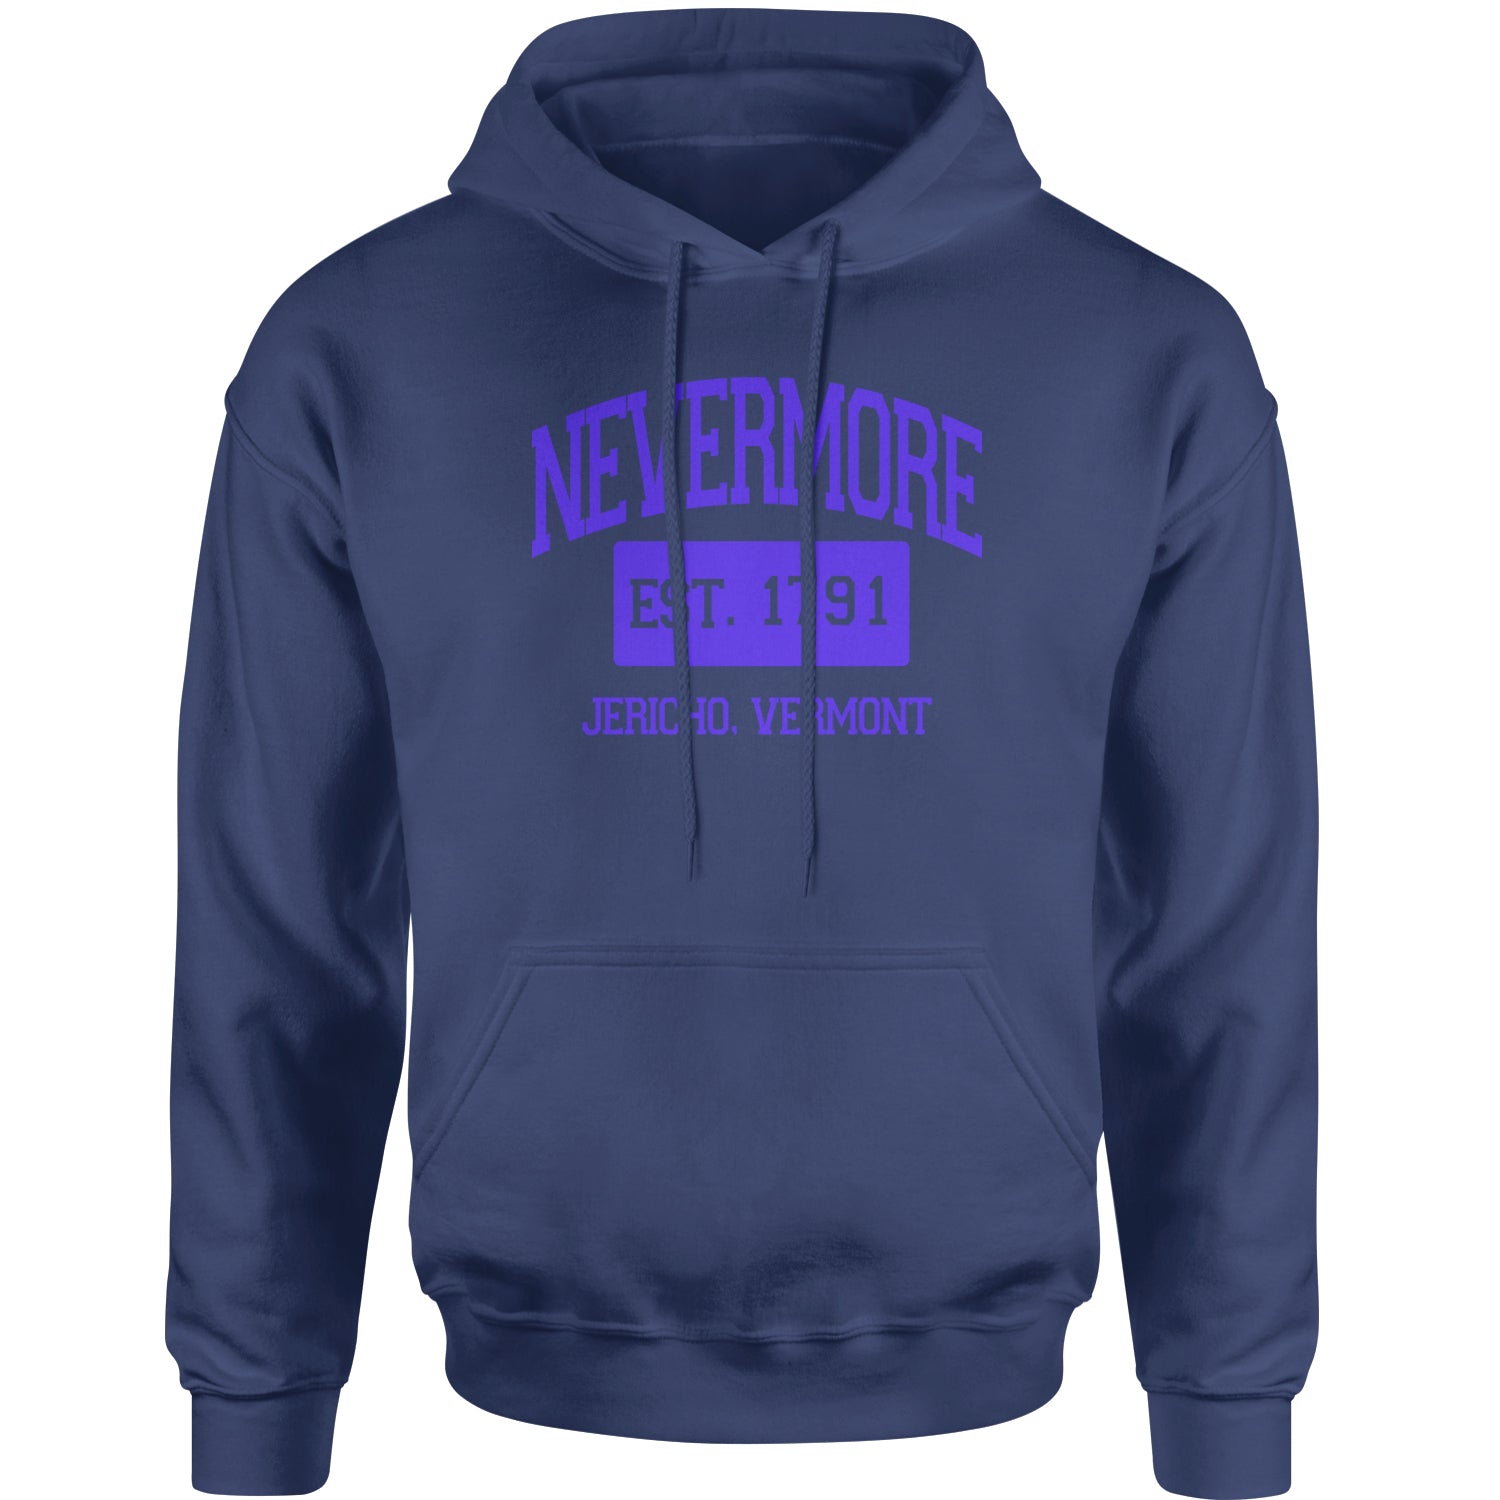 Nevermore Academy Wednesday Adult Hoodie Sweatshirt addams, family, gomez, morticia, pugsly, ricci, Wednesday by Expression Tees